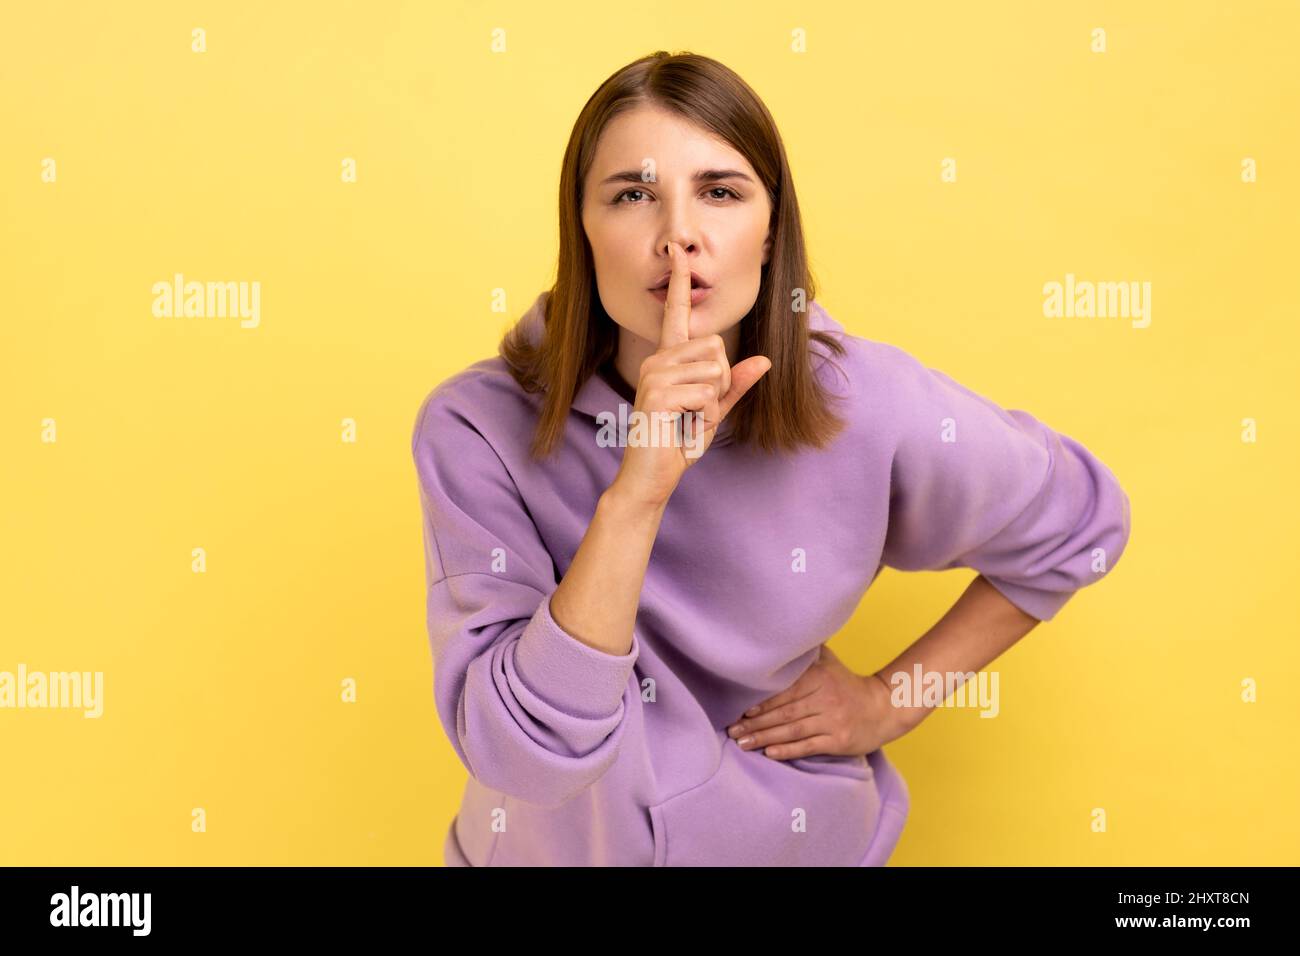 Shh, it's big secret. Portrait of beautiful serious woman showing gesture secret sign with finger near her lips, wearing purple hoodie. Indoor studio shot isolated on yellow background. Stock Photo